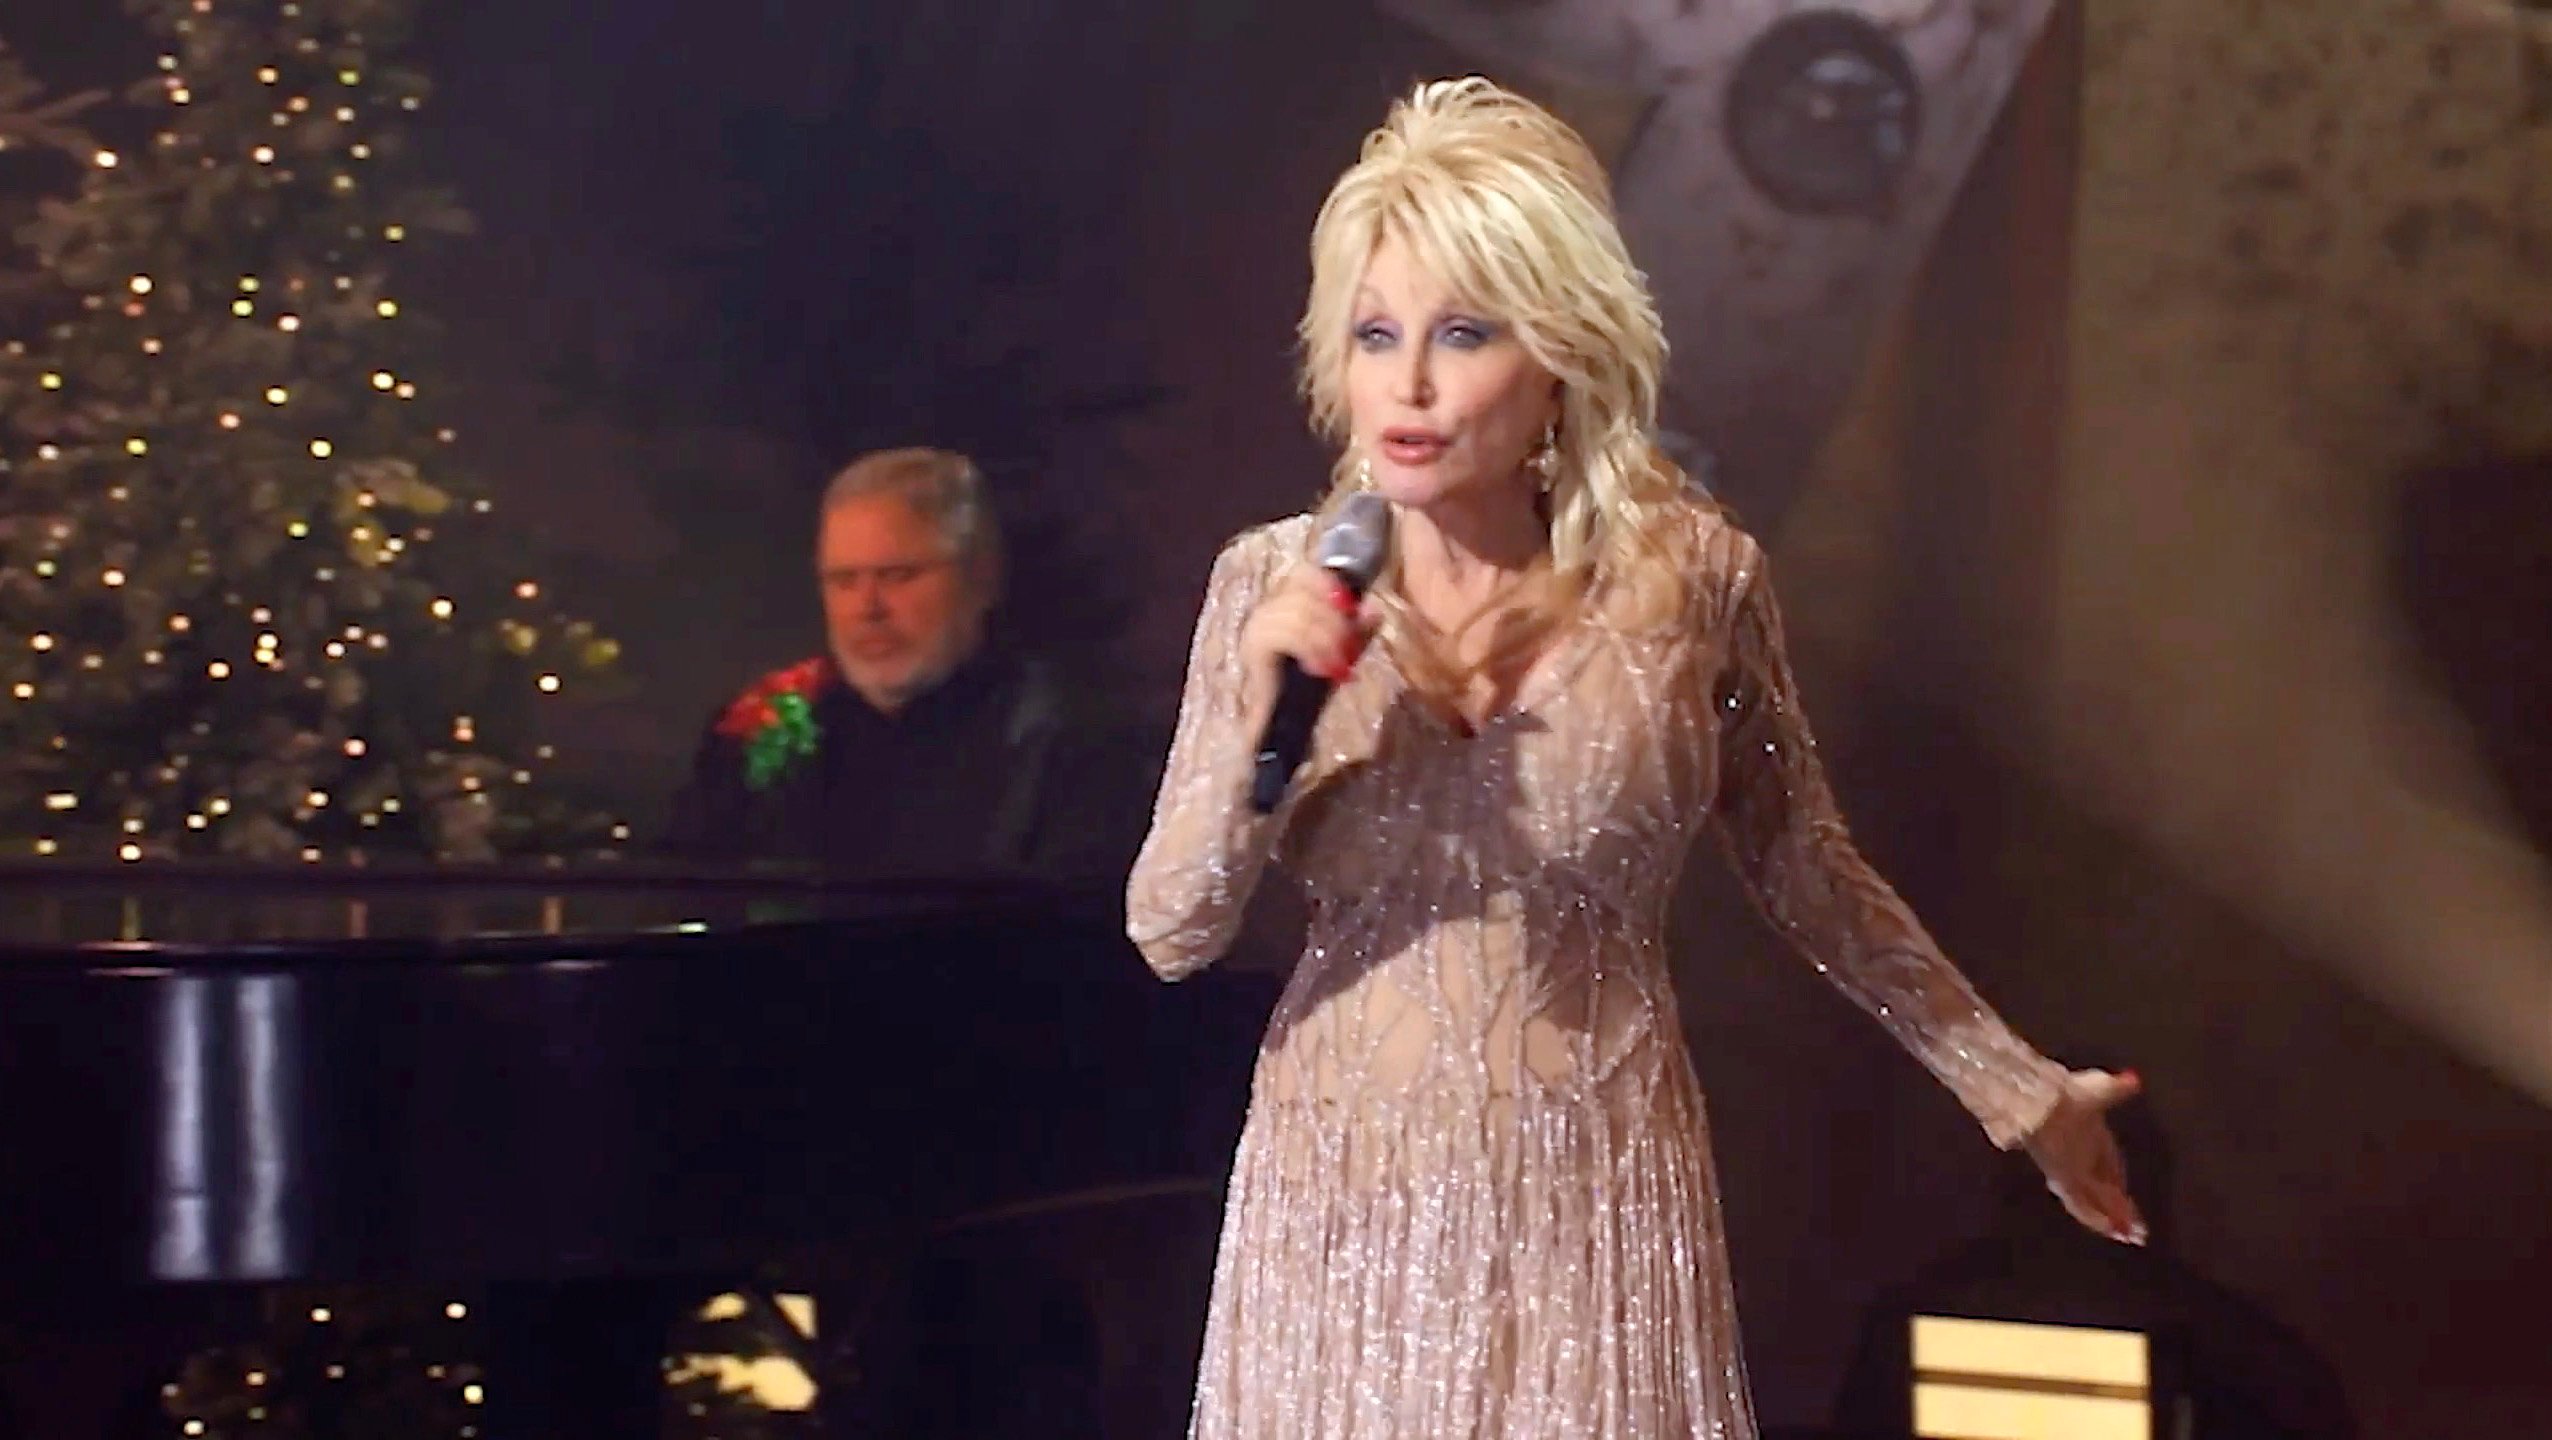 Dolly Parton performs for Billboard's Women in Music. She's in a pale pink dress and singing into a microphone.